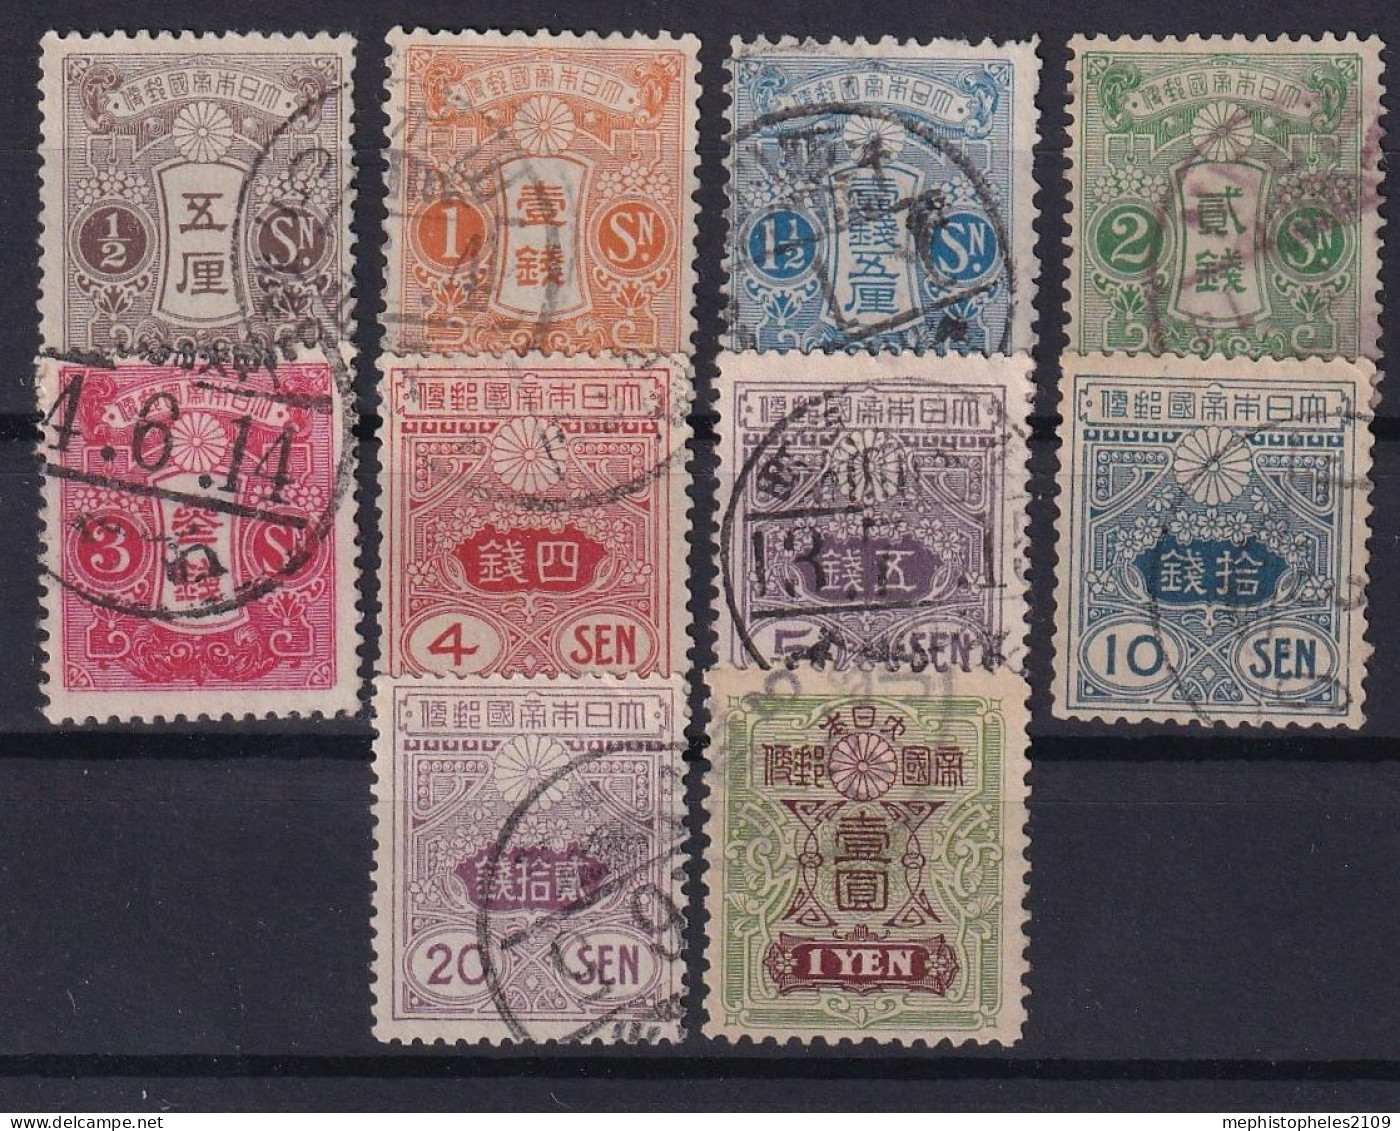 JAPAN 1913 - Canceled - Sc# 115-123, 125 - Used Stamps